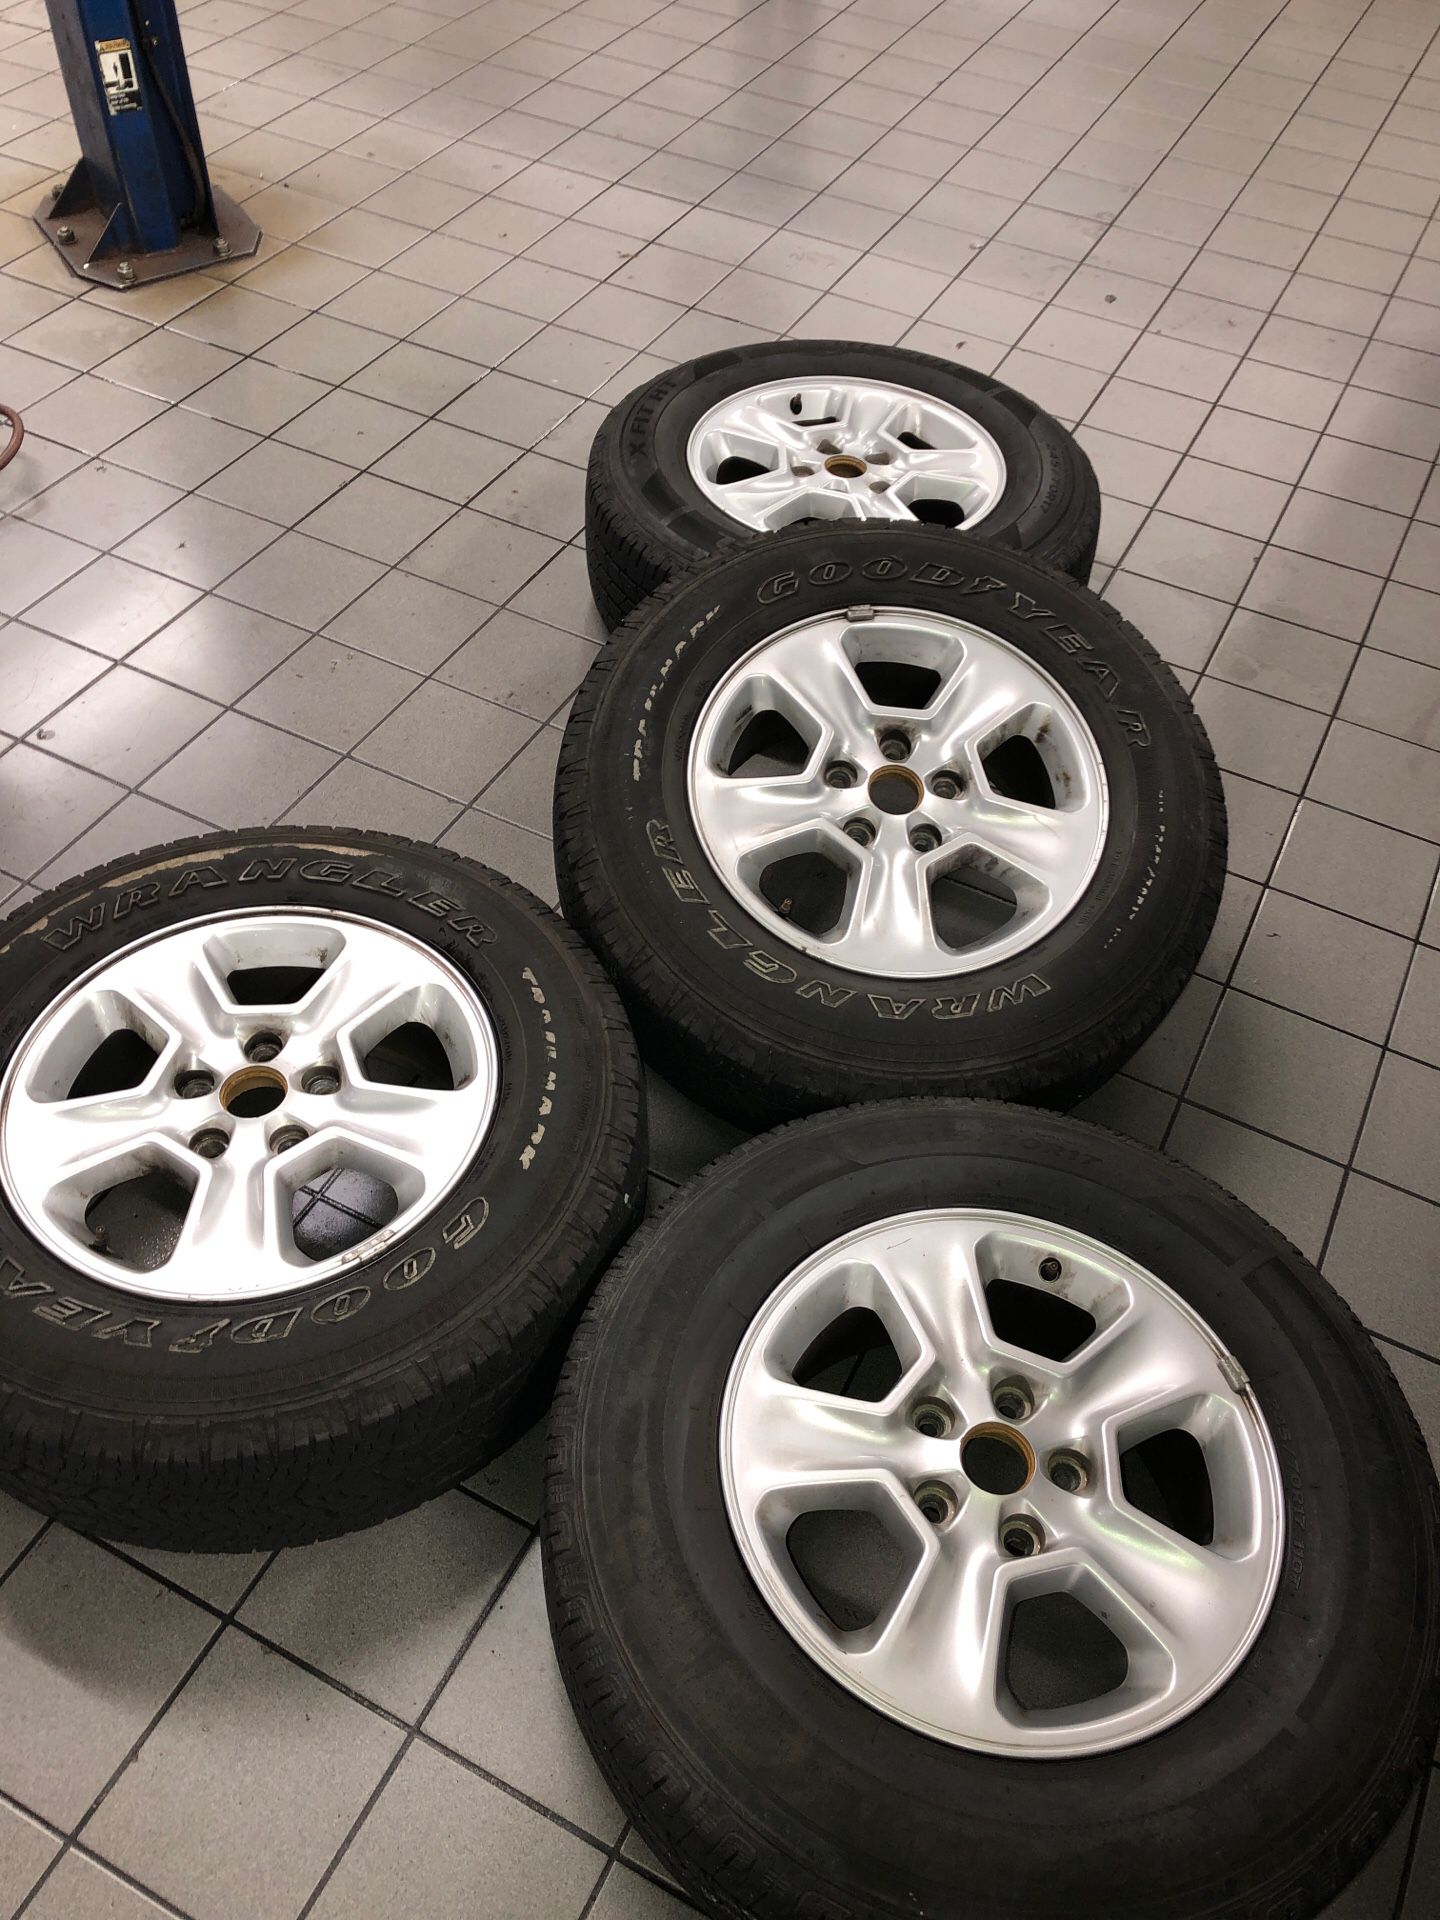 Jeep Cherokee wheels for sale 245/70/17 The best offer